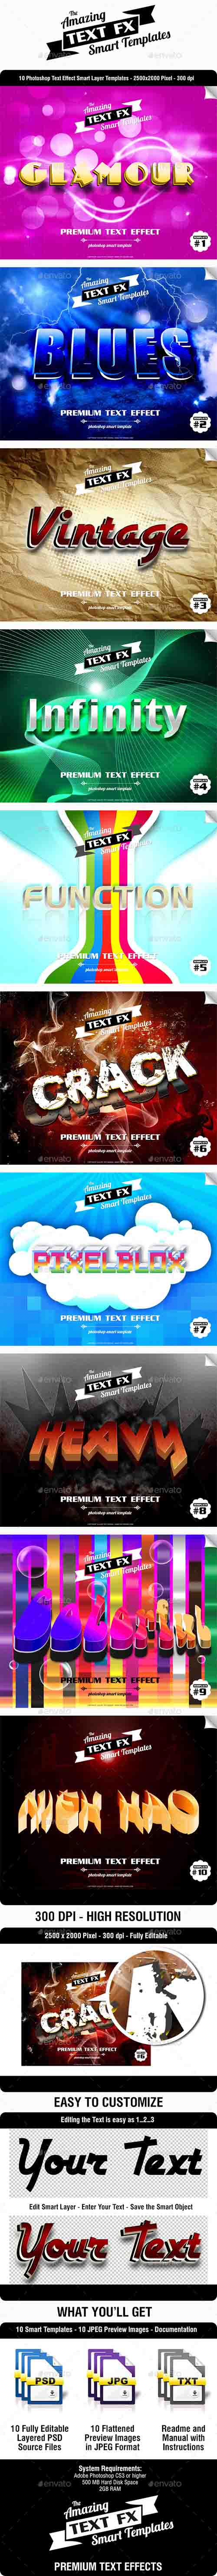 GraphicRiver Text Effect Smart Object Templates 11139488